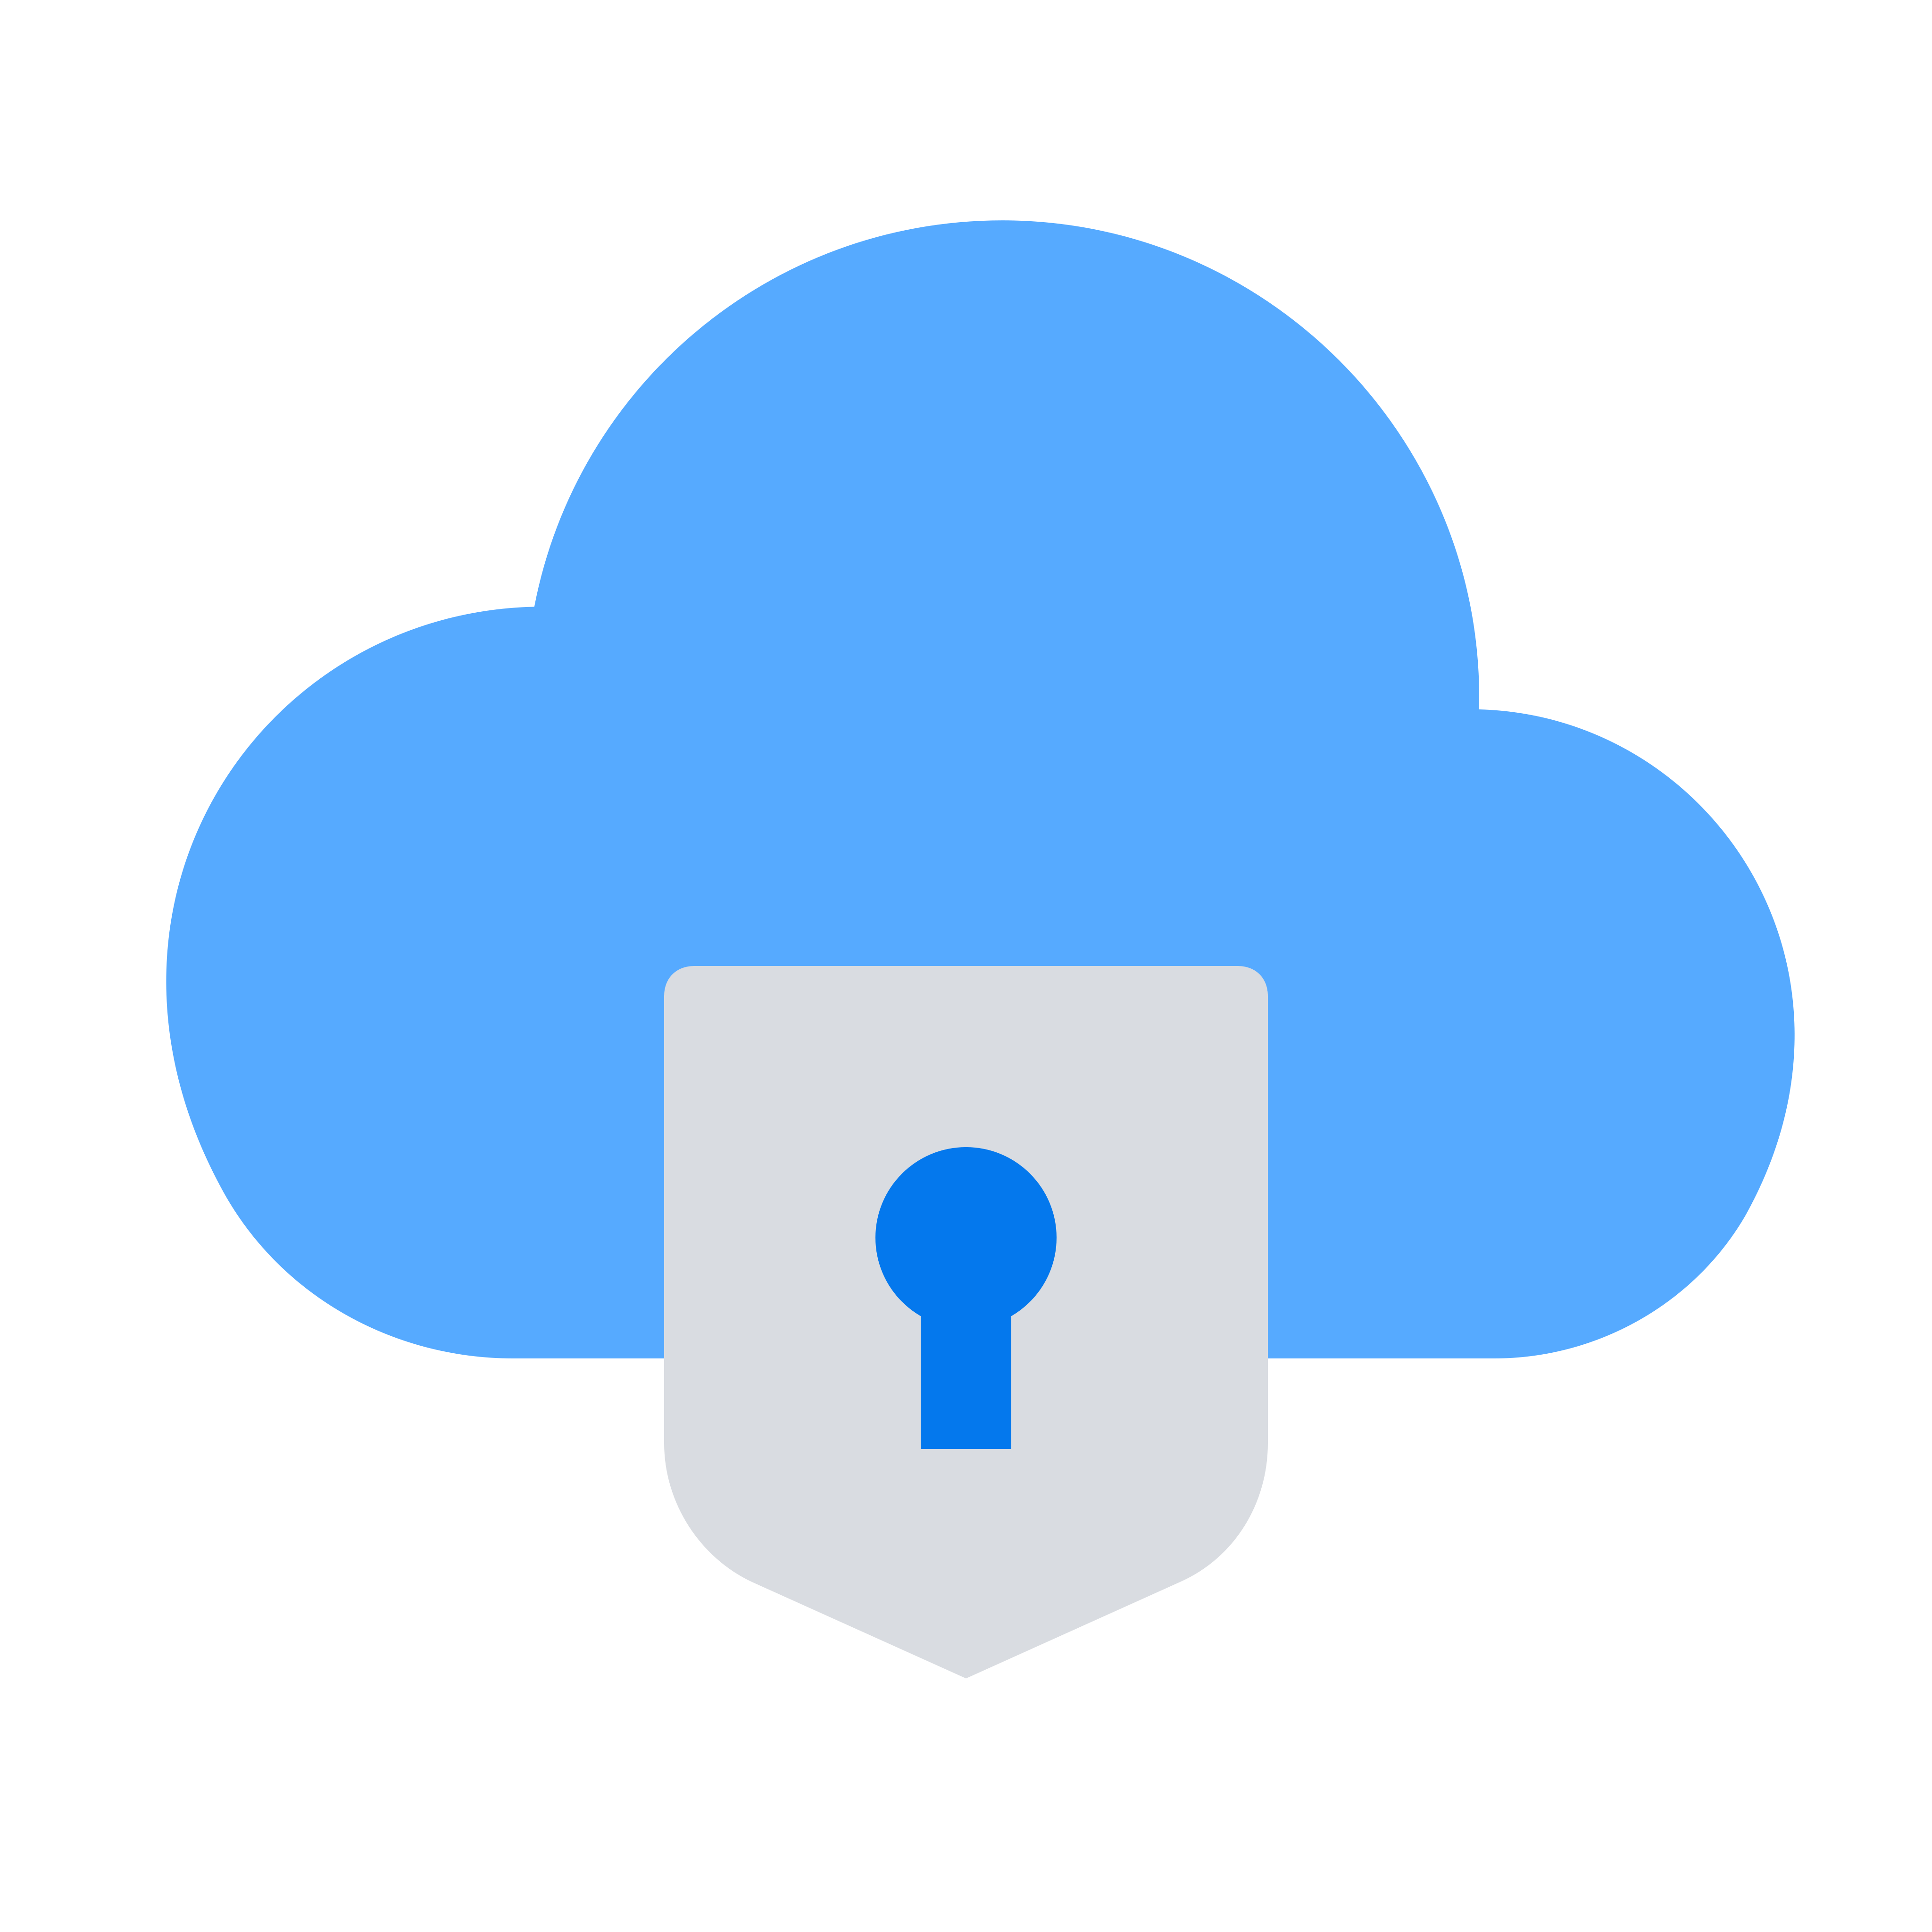 4922259_cloud_protection_security